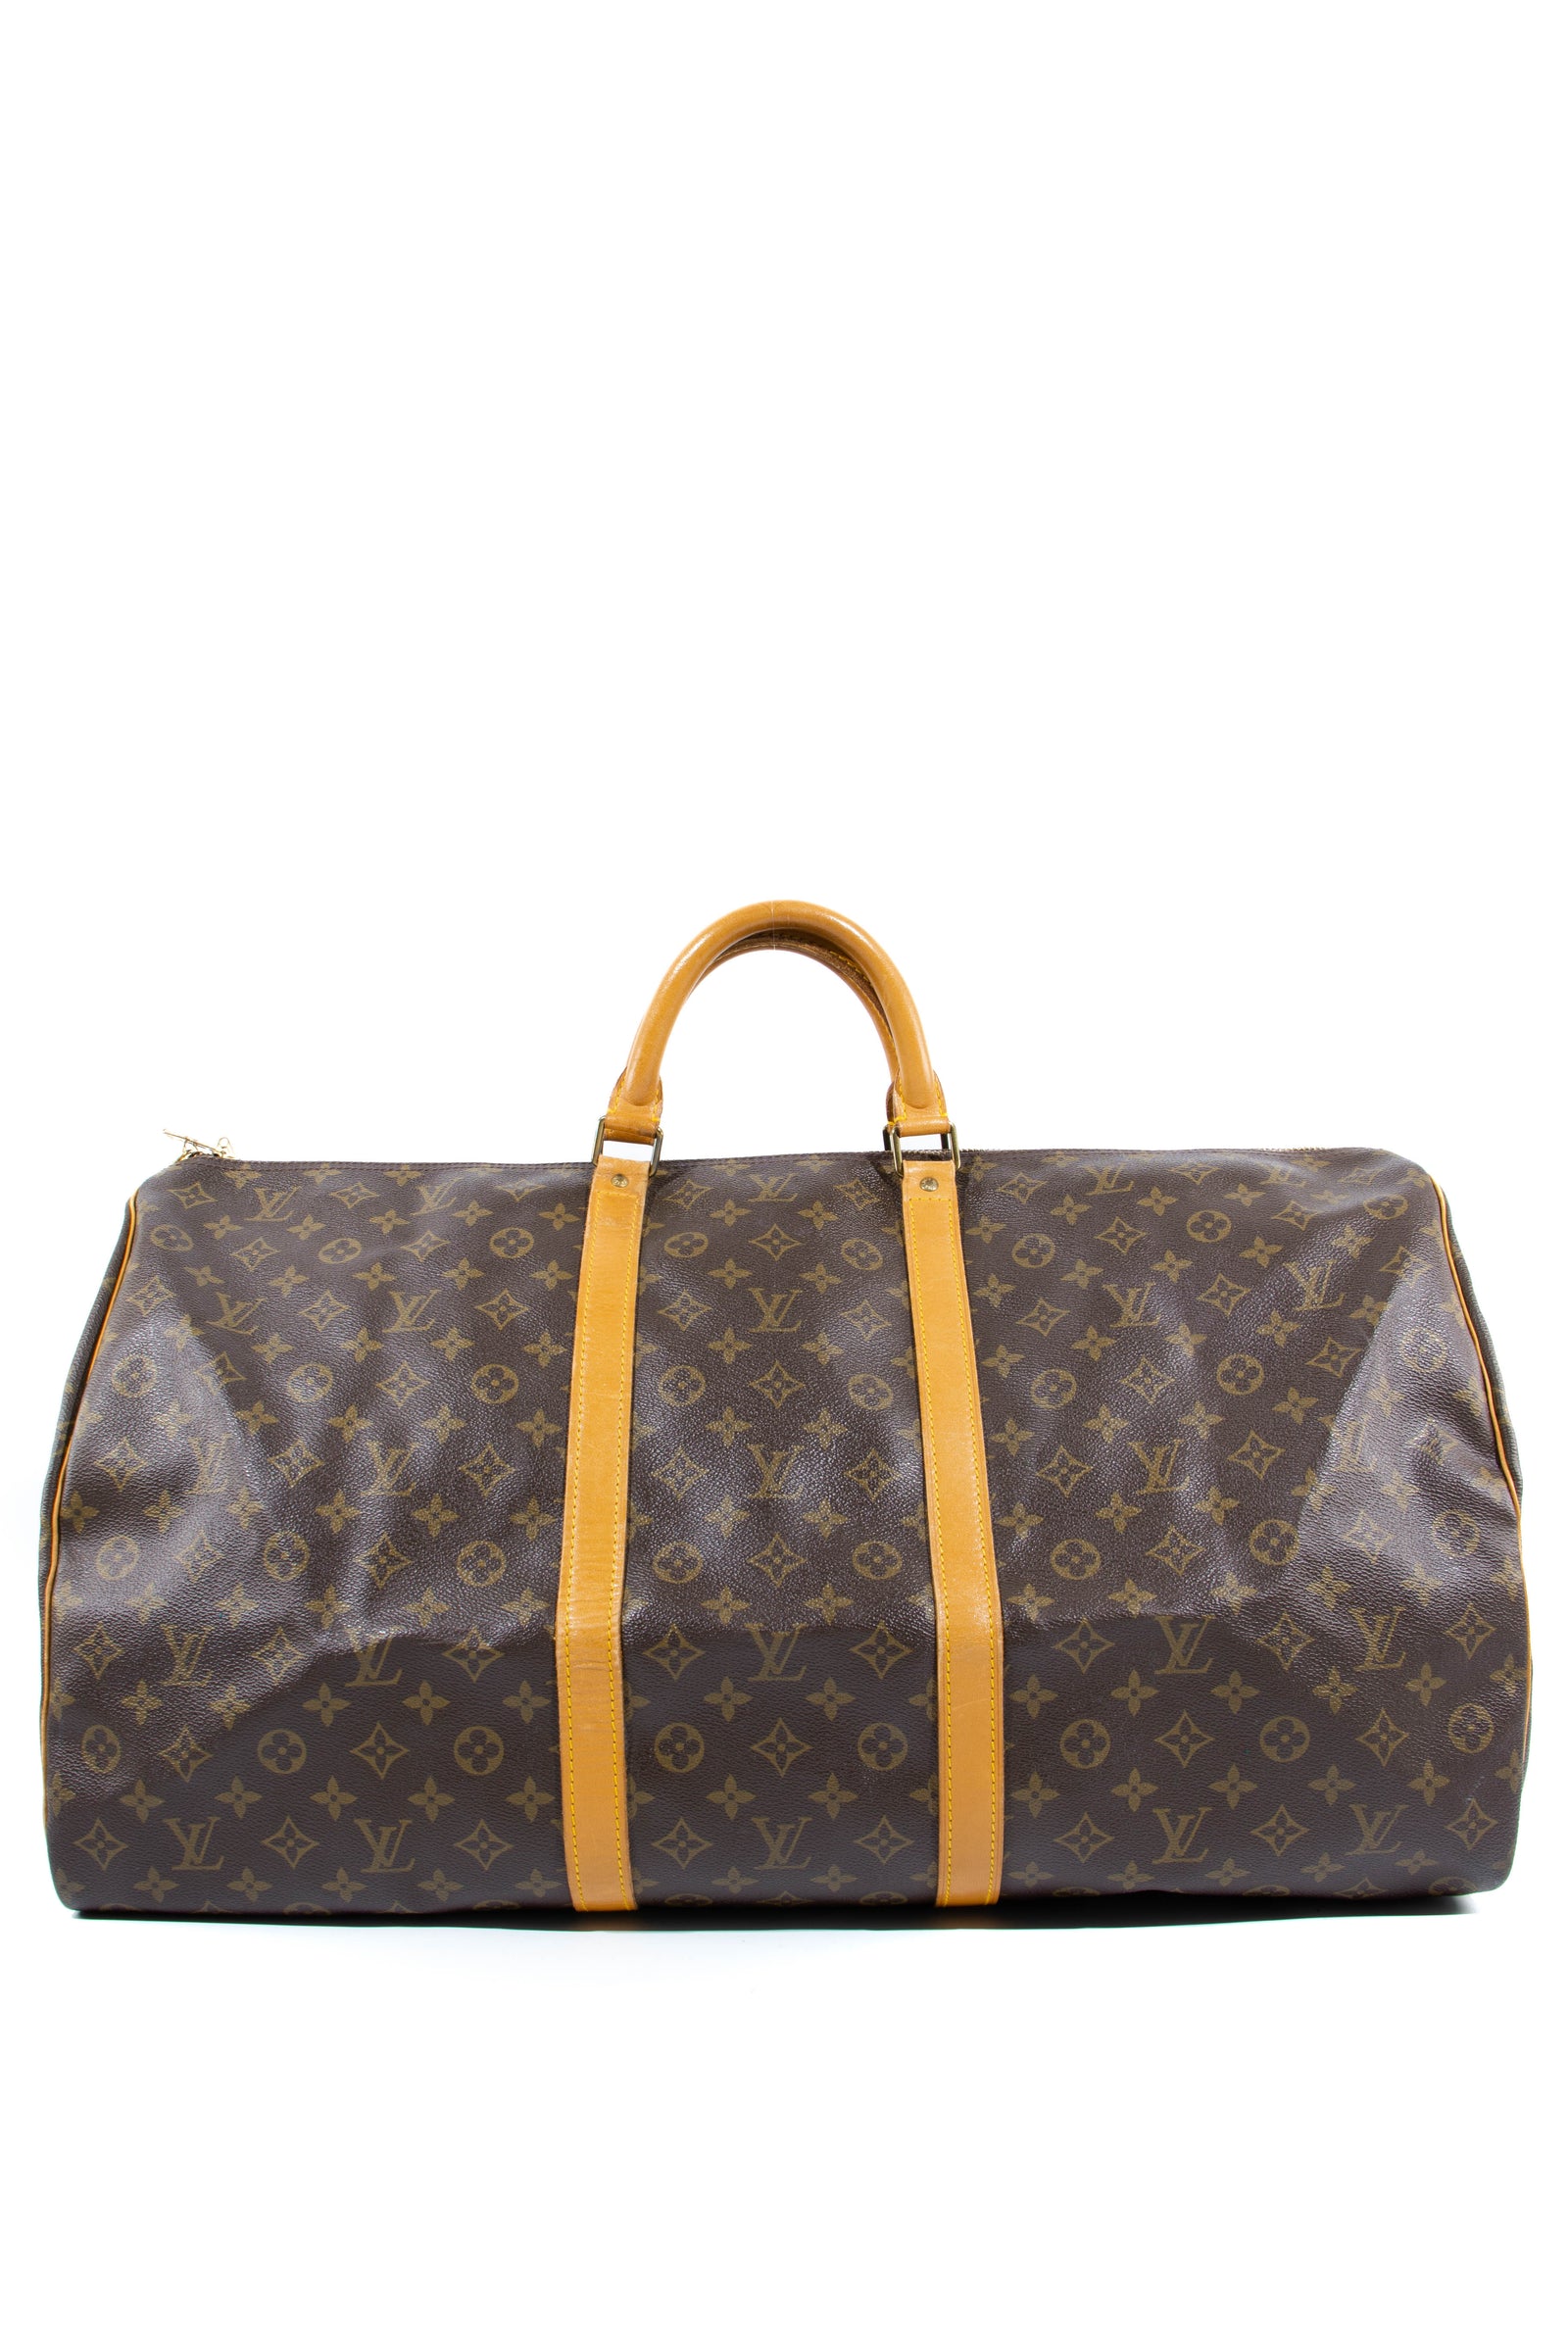 Bag and Purse Organizer with Regular Style for Louis Vuitton Keepall 45,  50, 55 and 60